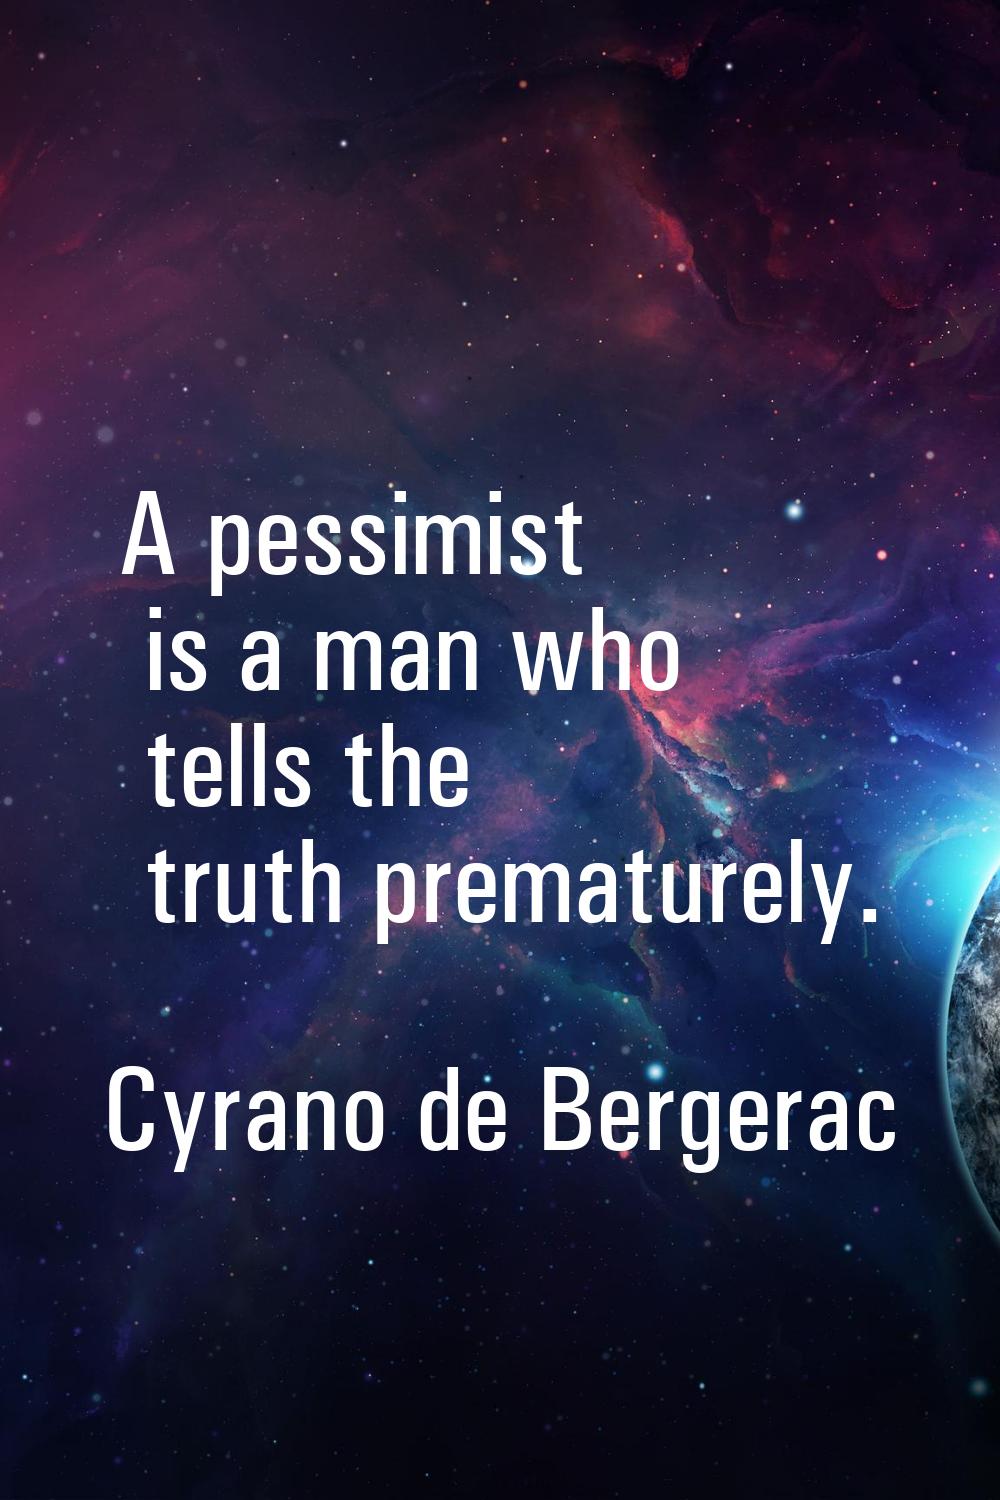 A pessimist is a man who tells the truth prematurely.